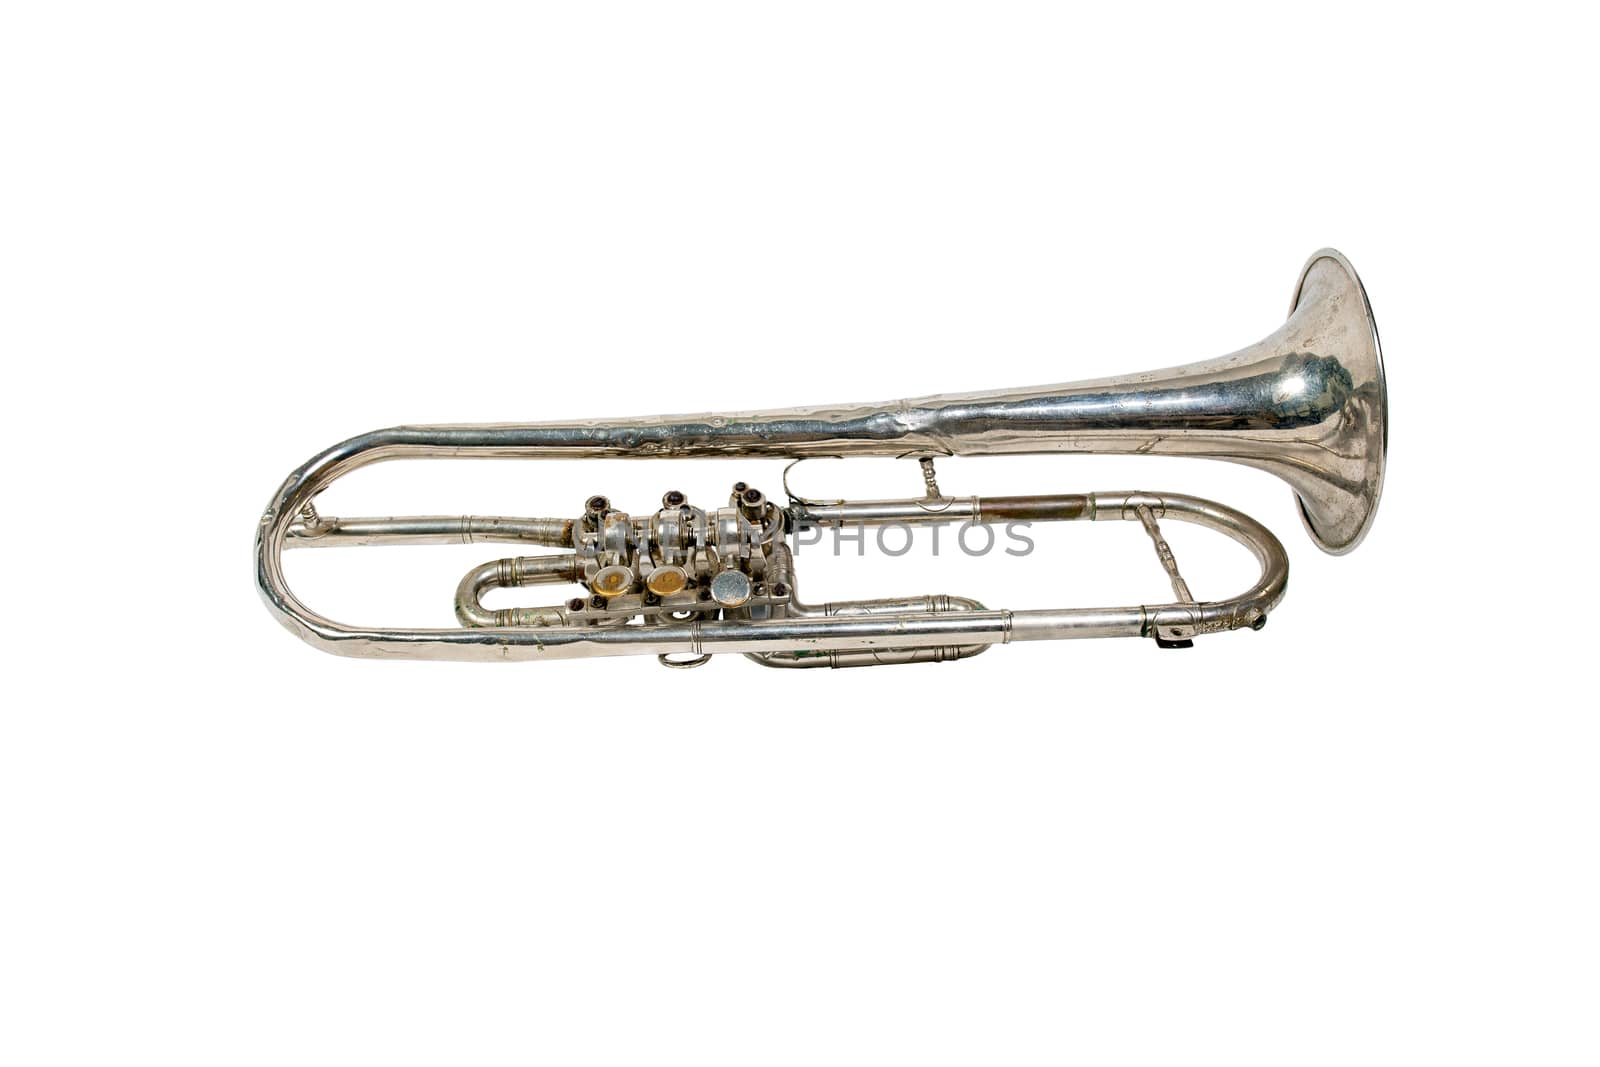 silver trumpet isolated on a white background. Musical instrument by 977_ReX_977